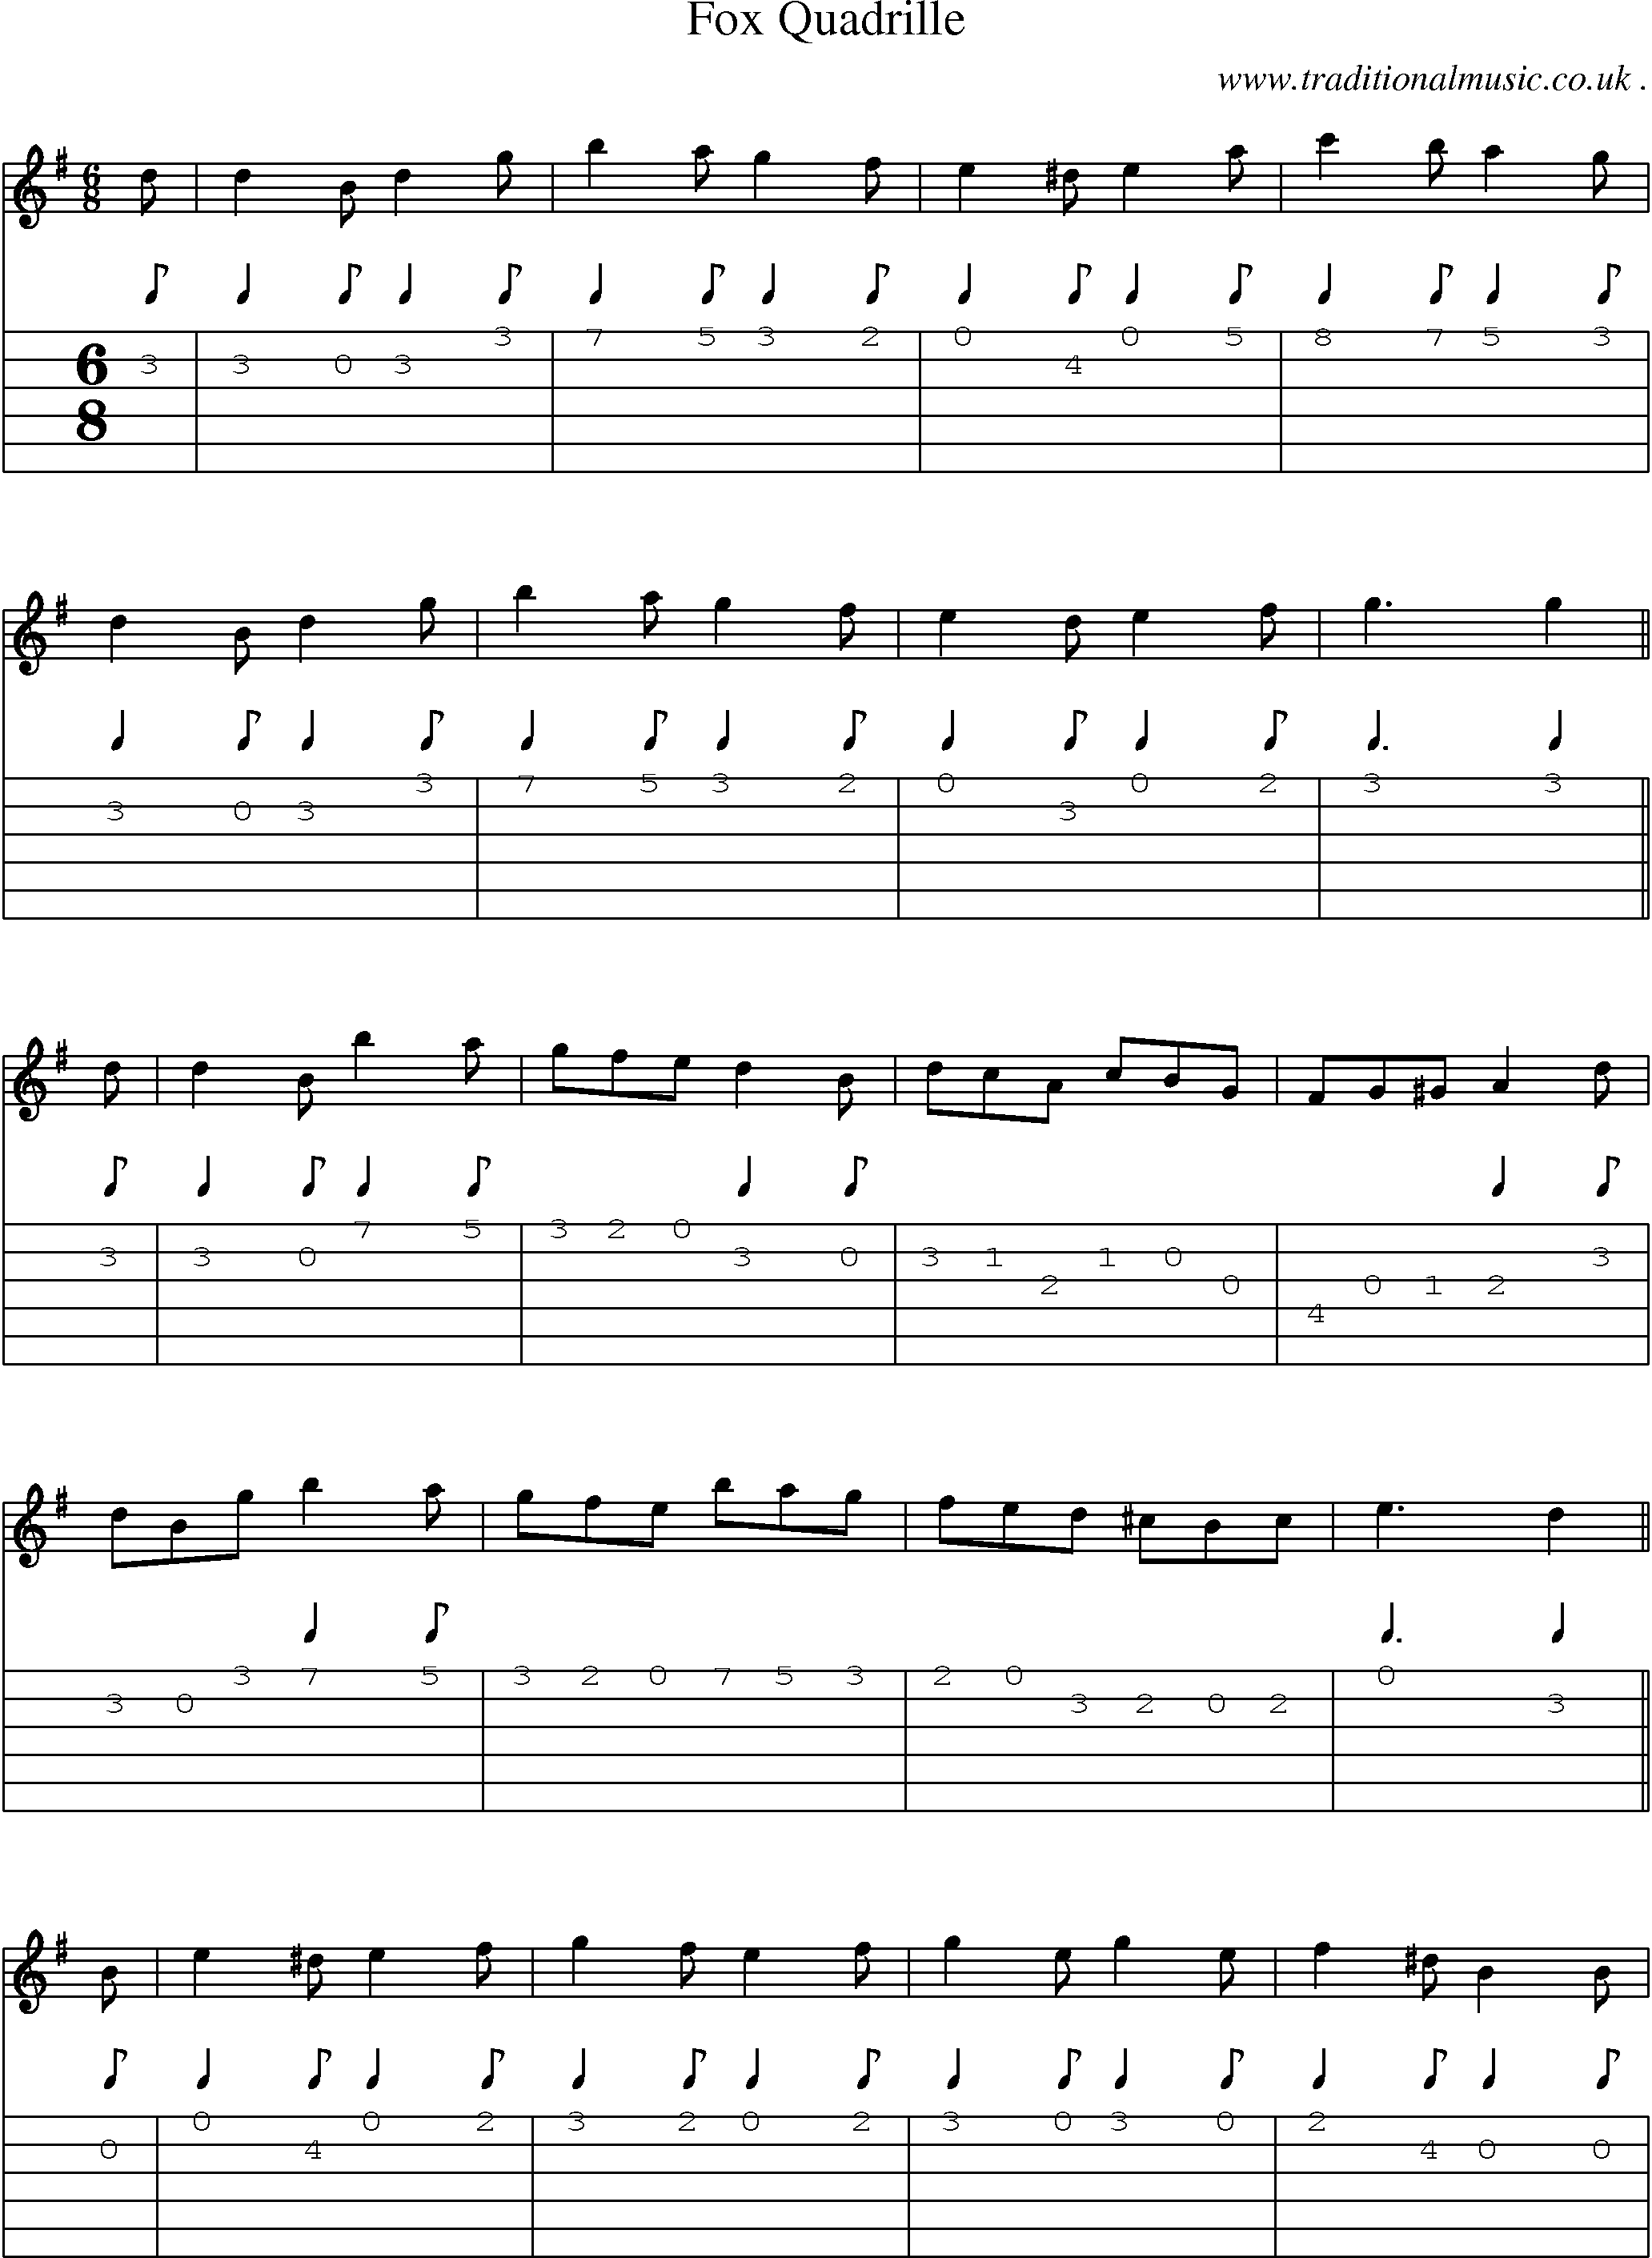 Sheet-Music and Guitar Tabs for Fox Quadrille